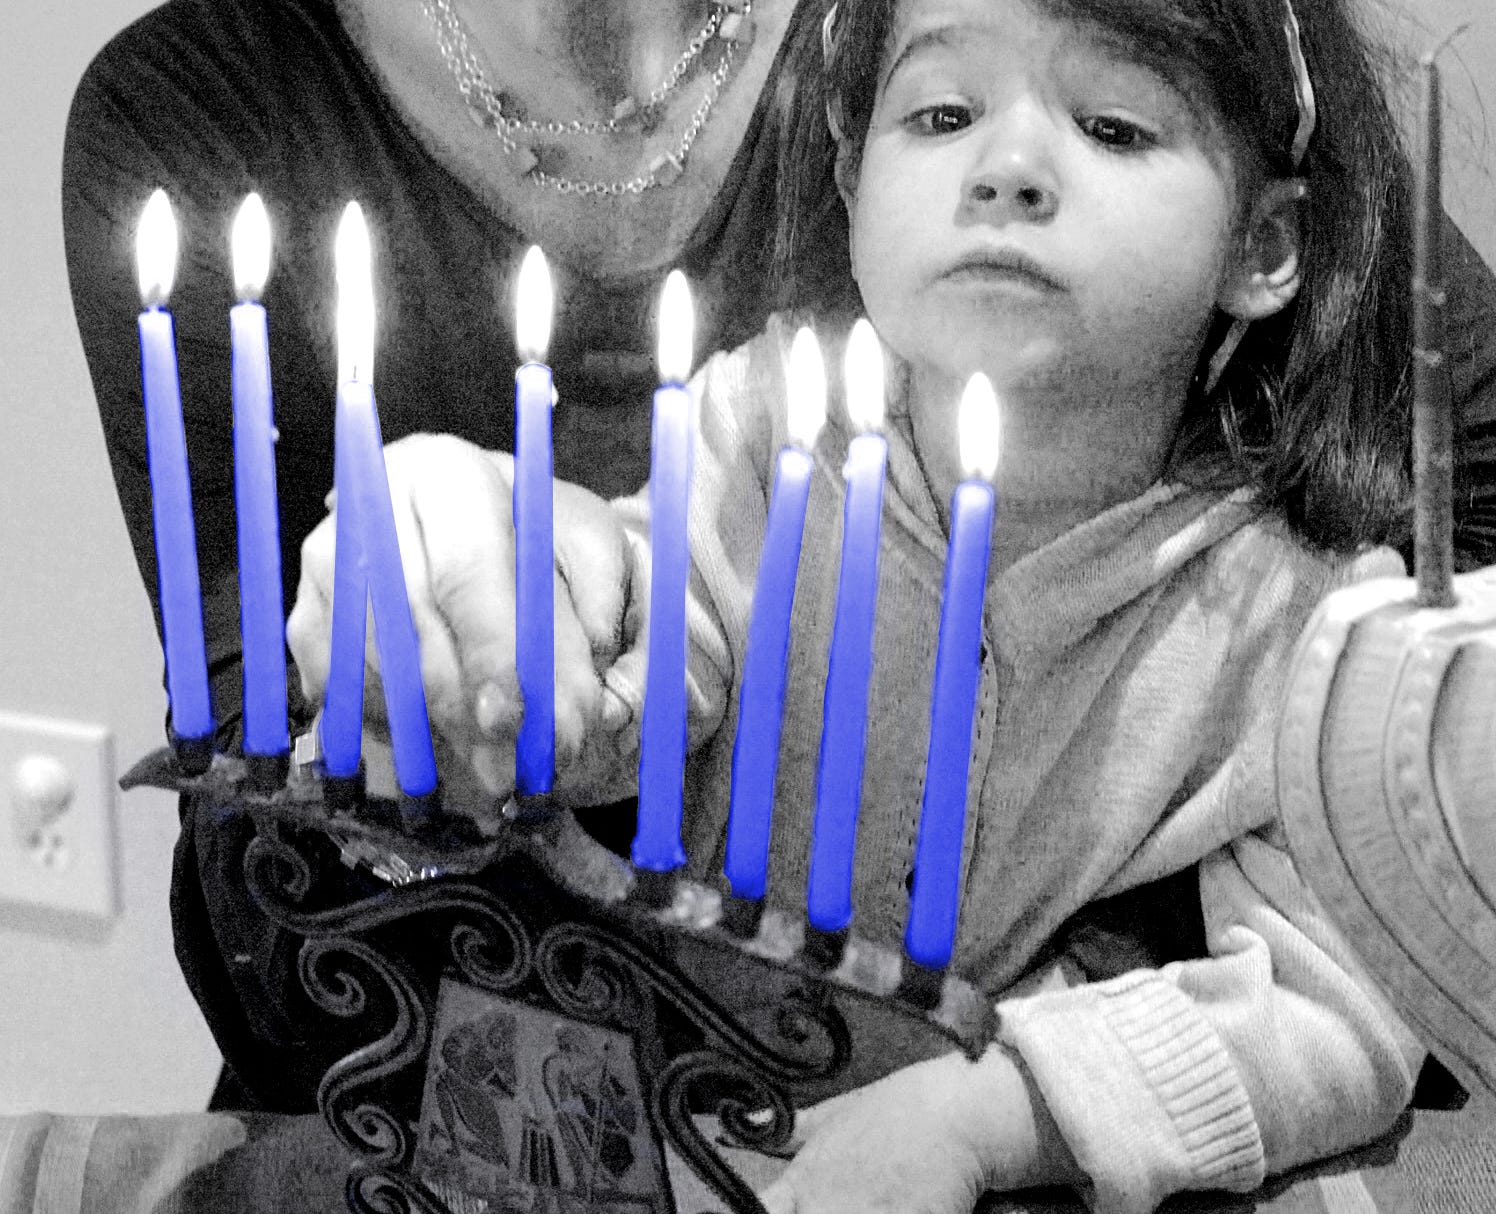 During Hanukkah, Jews light candles on a menorah over eight days in a celebration of the Festival of Lights.